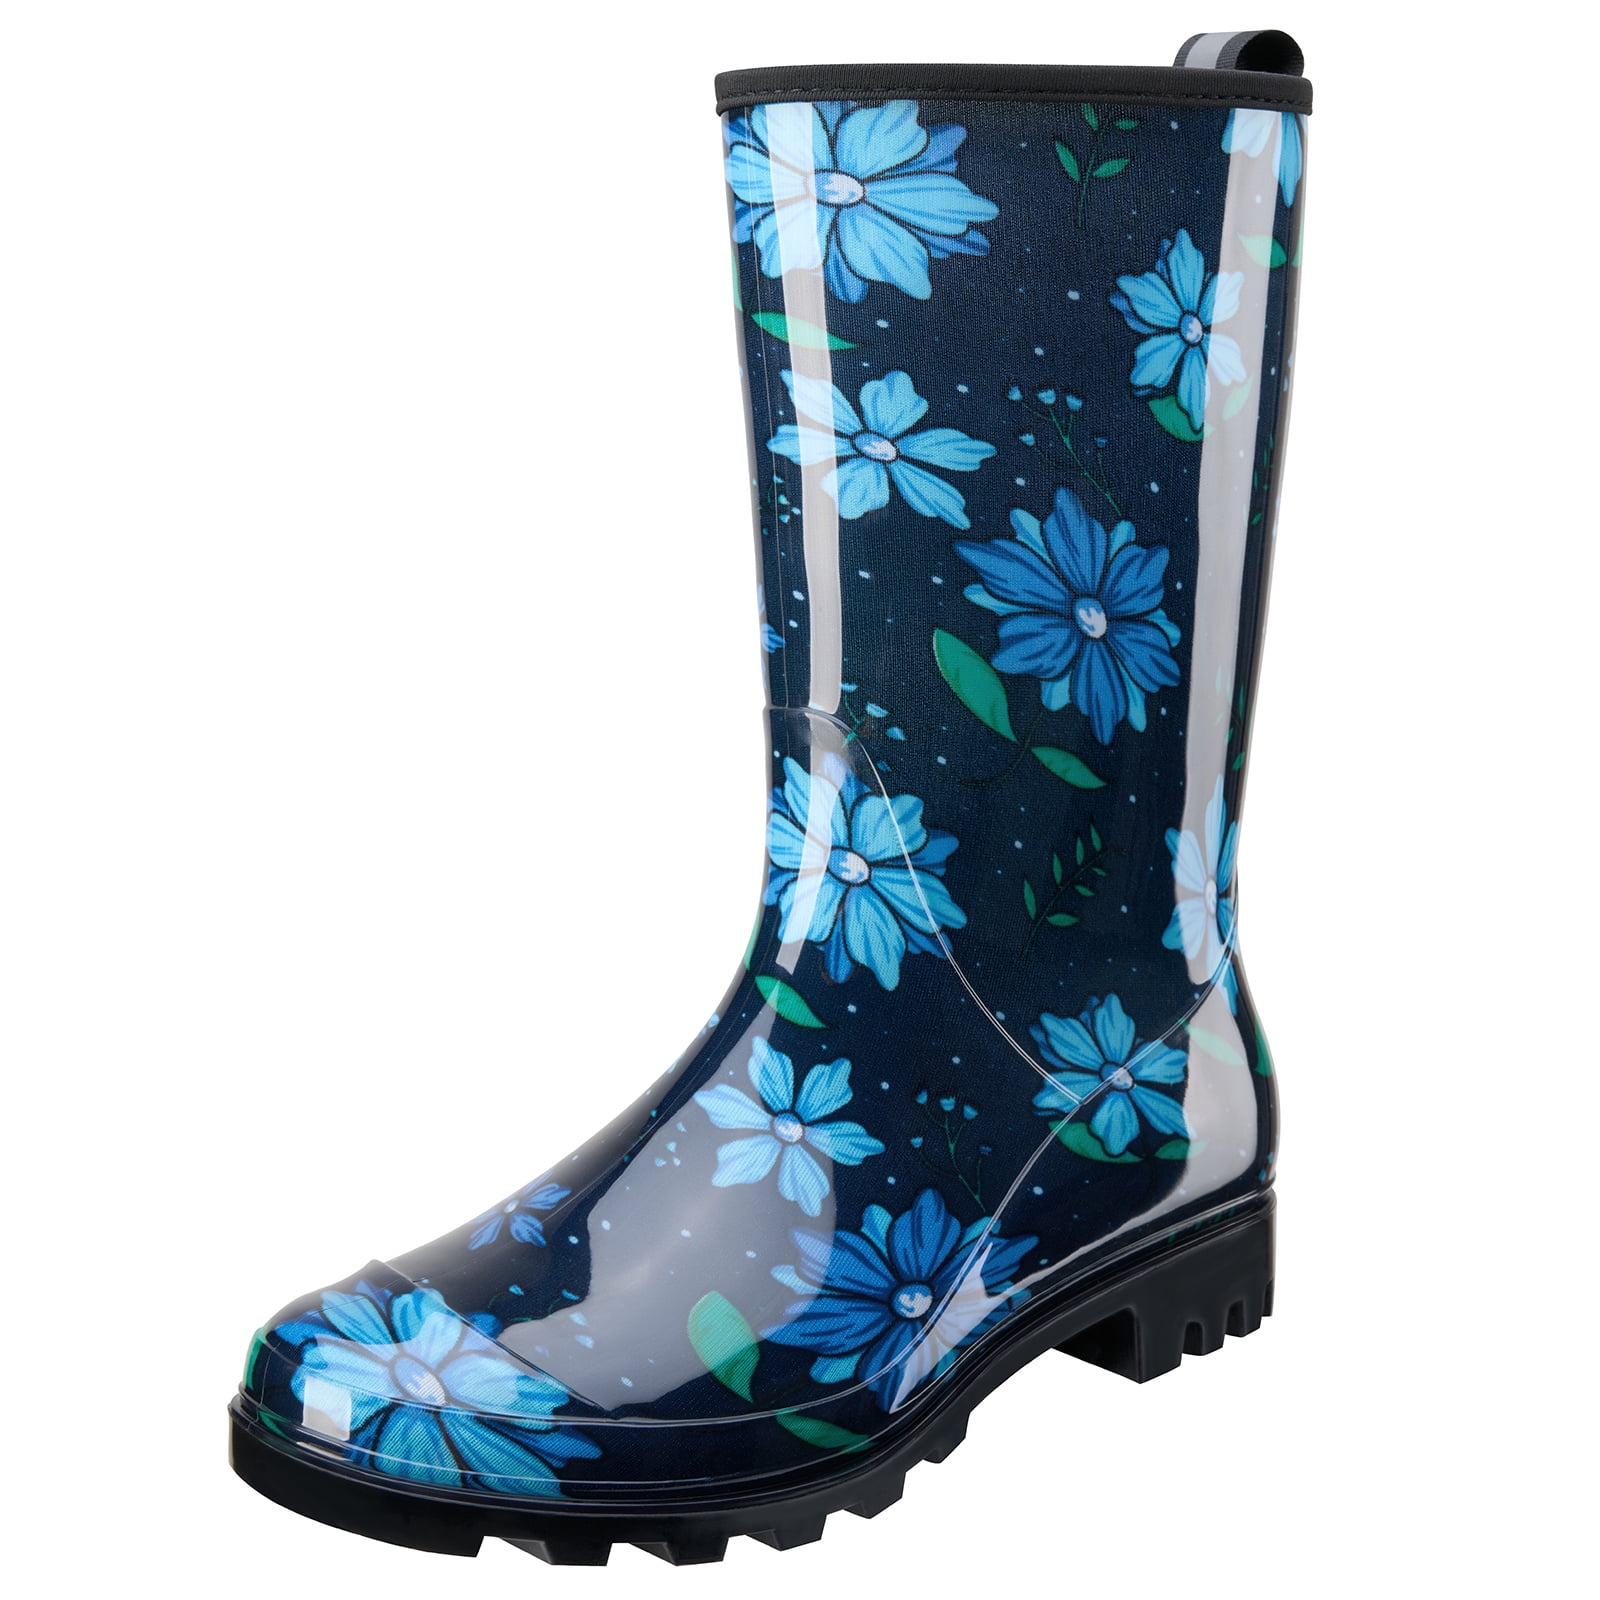 A.O.R Toddler Girls Black Rain Boots Snow Boots with Colorful Flower Design w/Tie and Lining